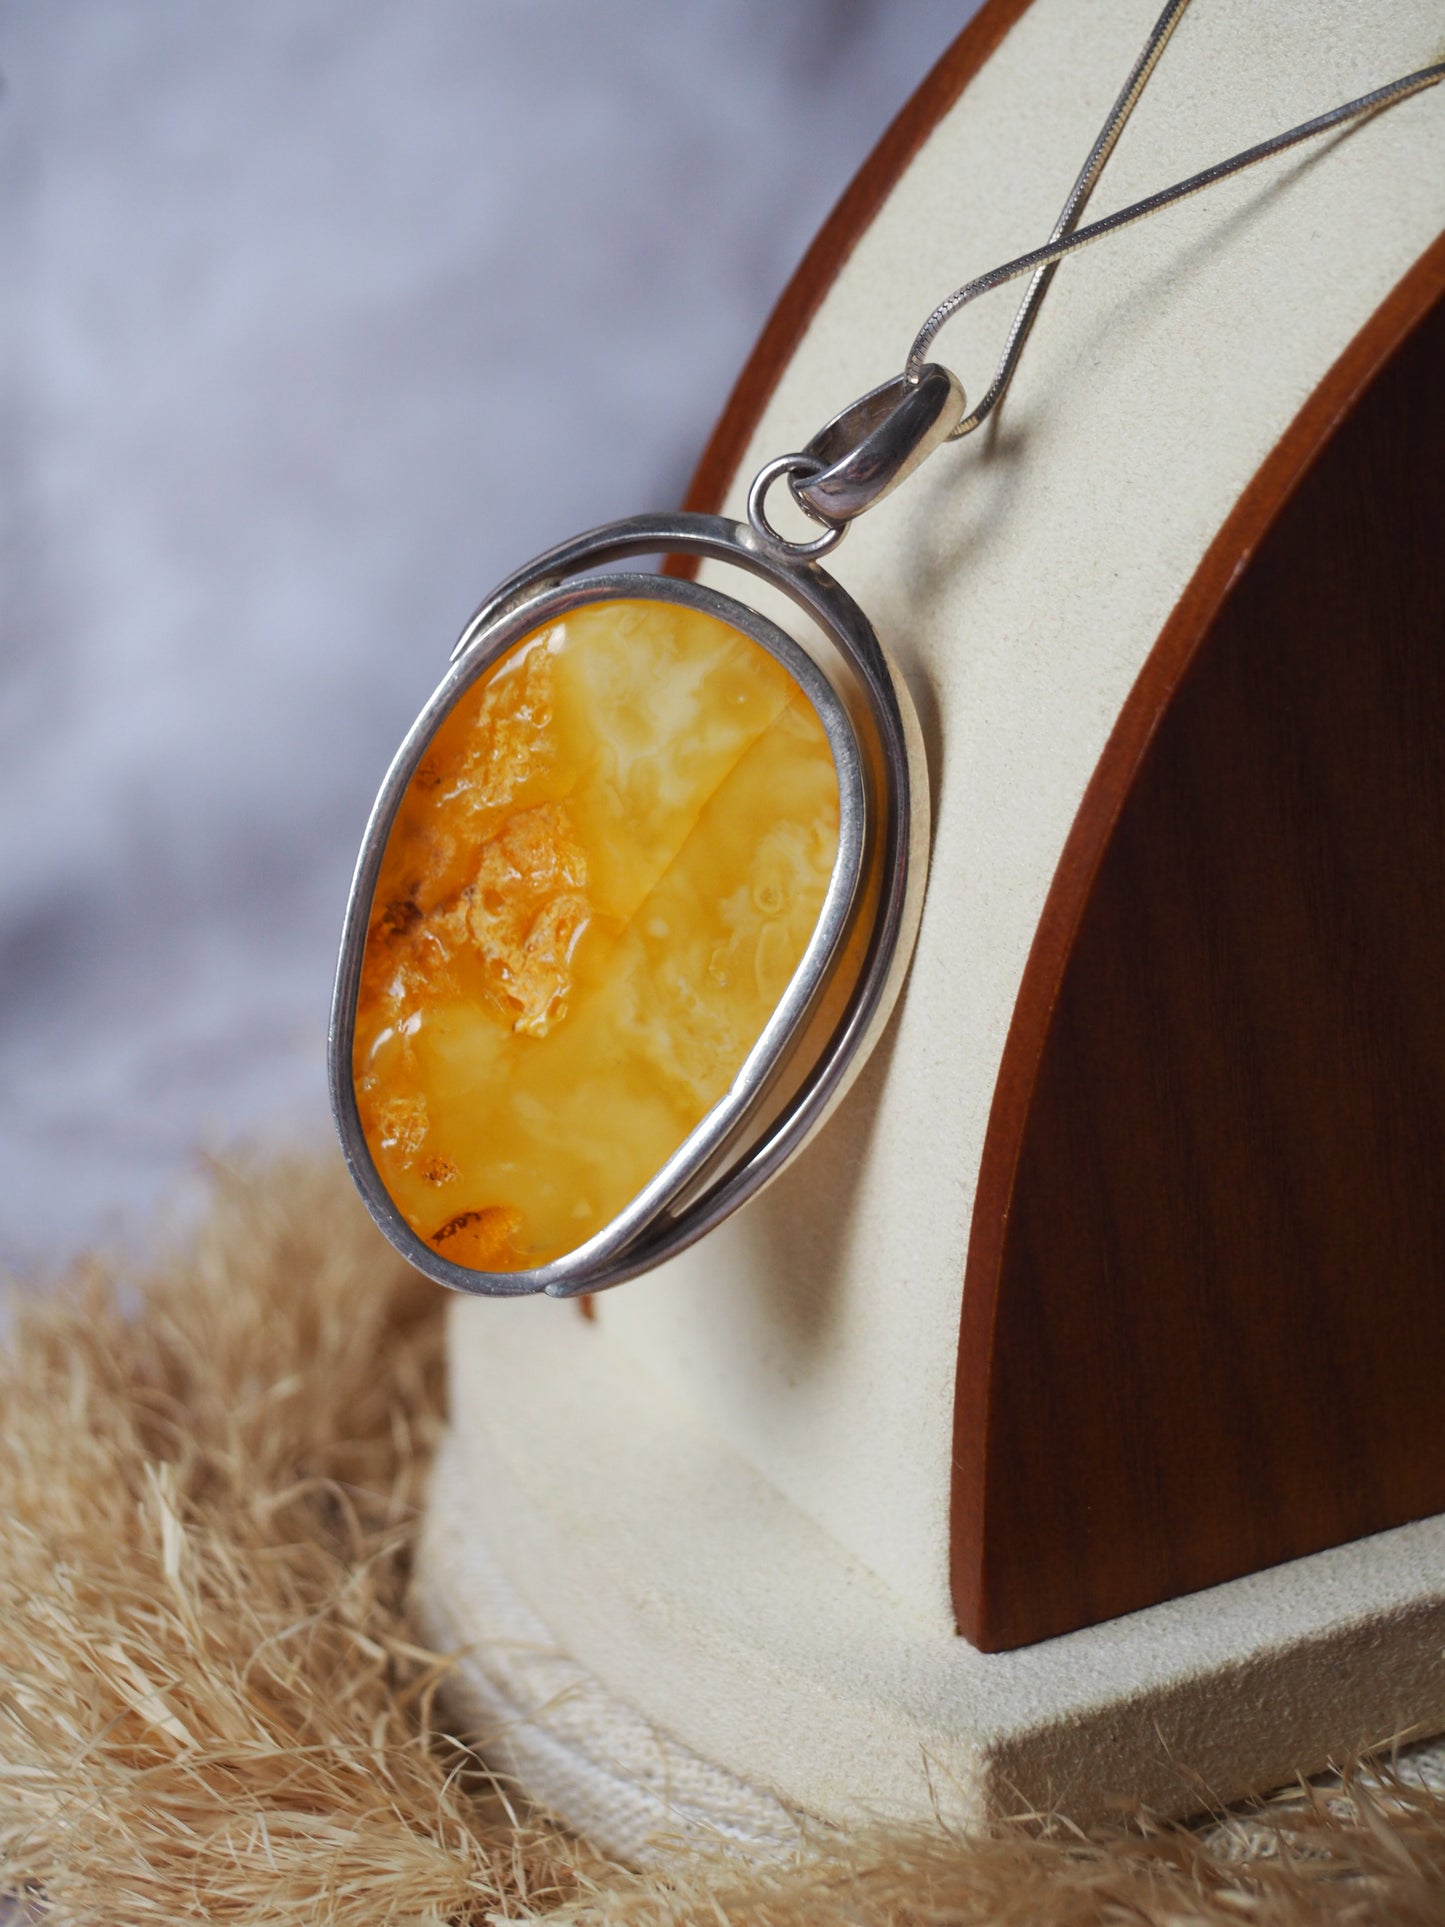 Natural butterscotch Amber Pendant with Raw Back in Silver Frame